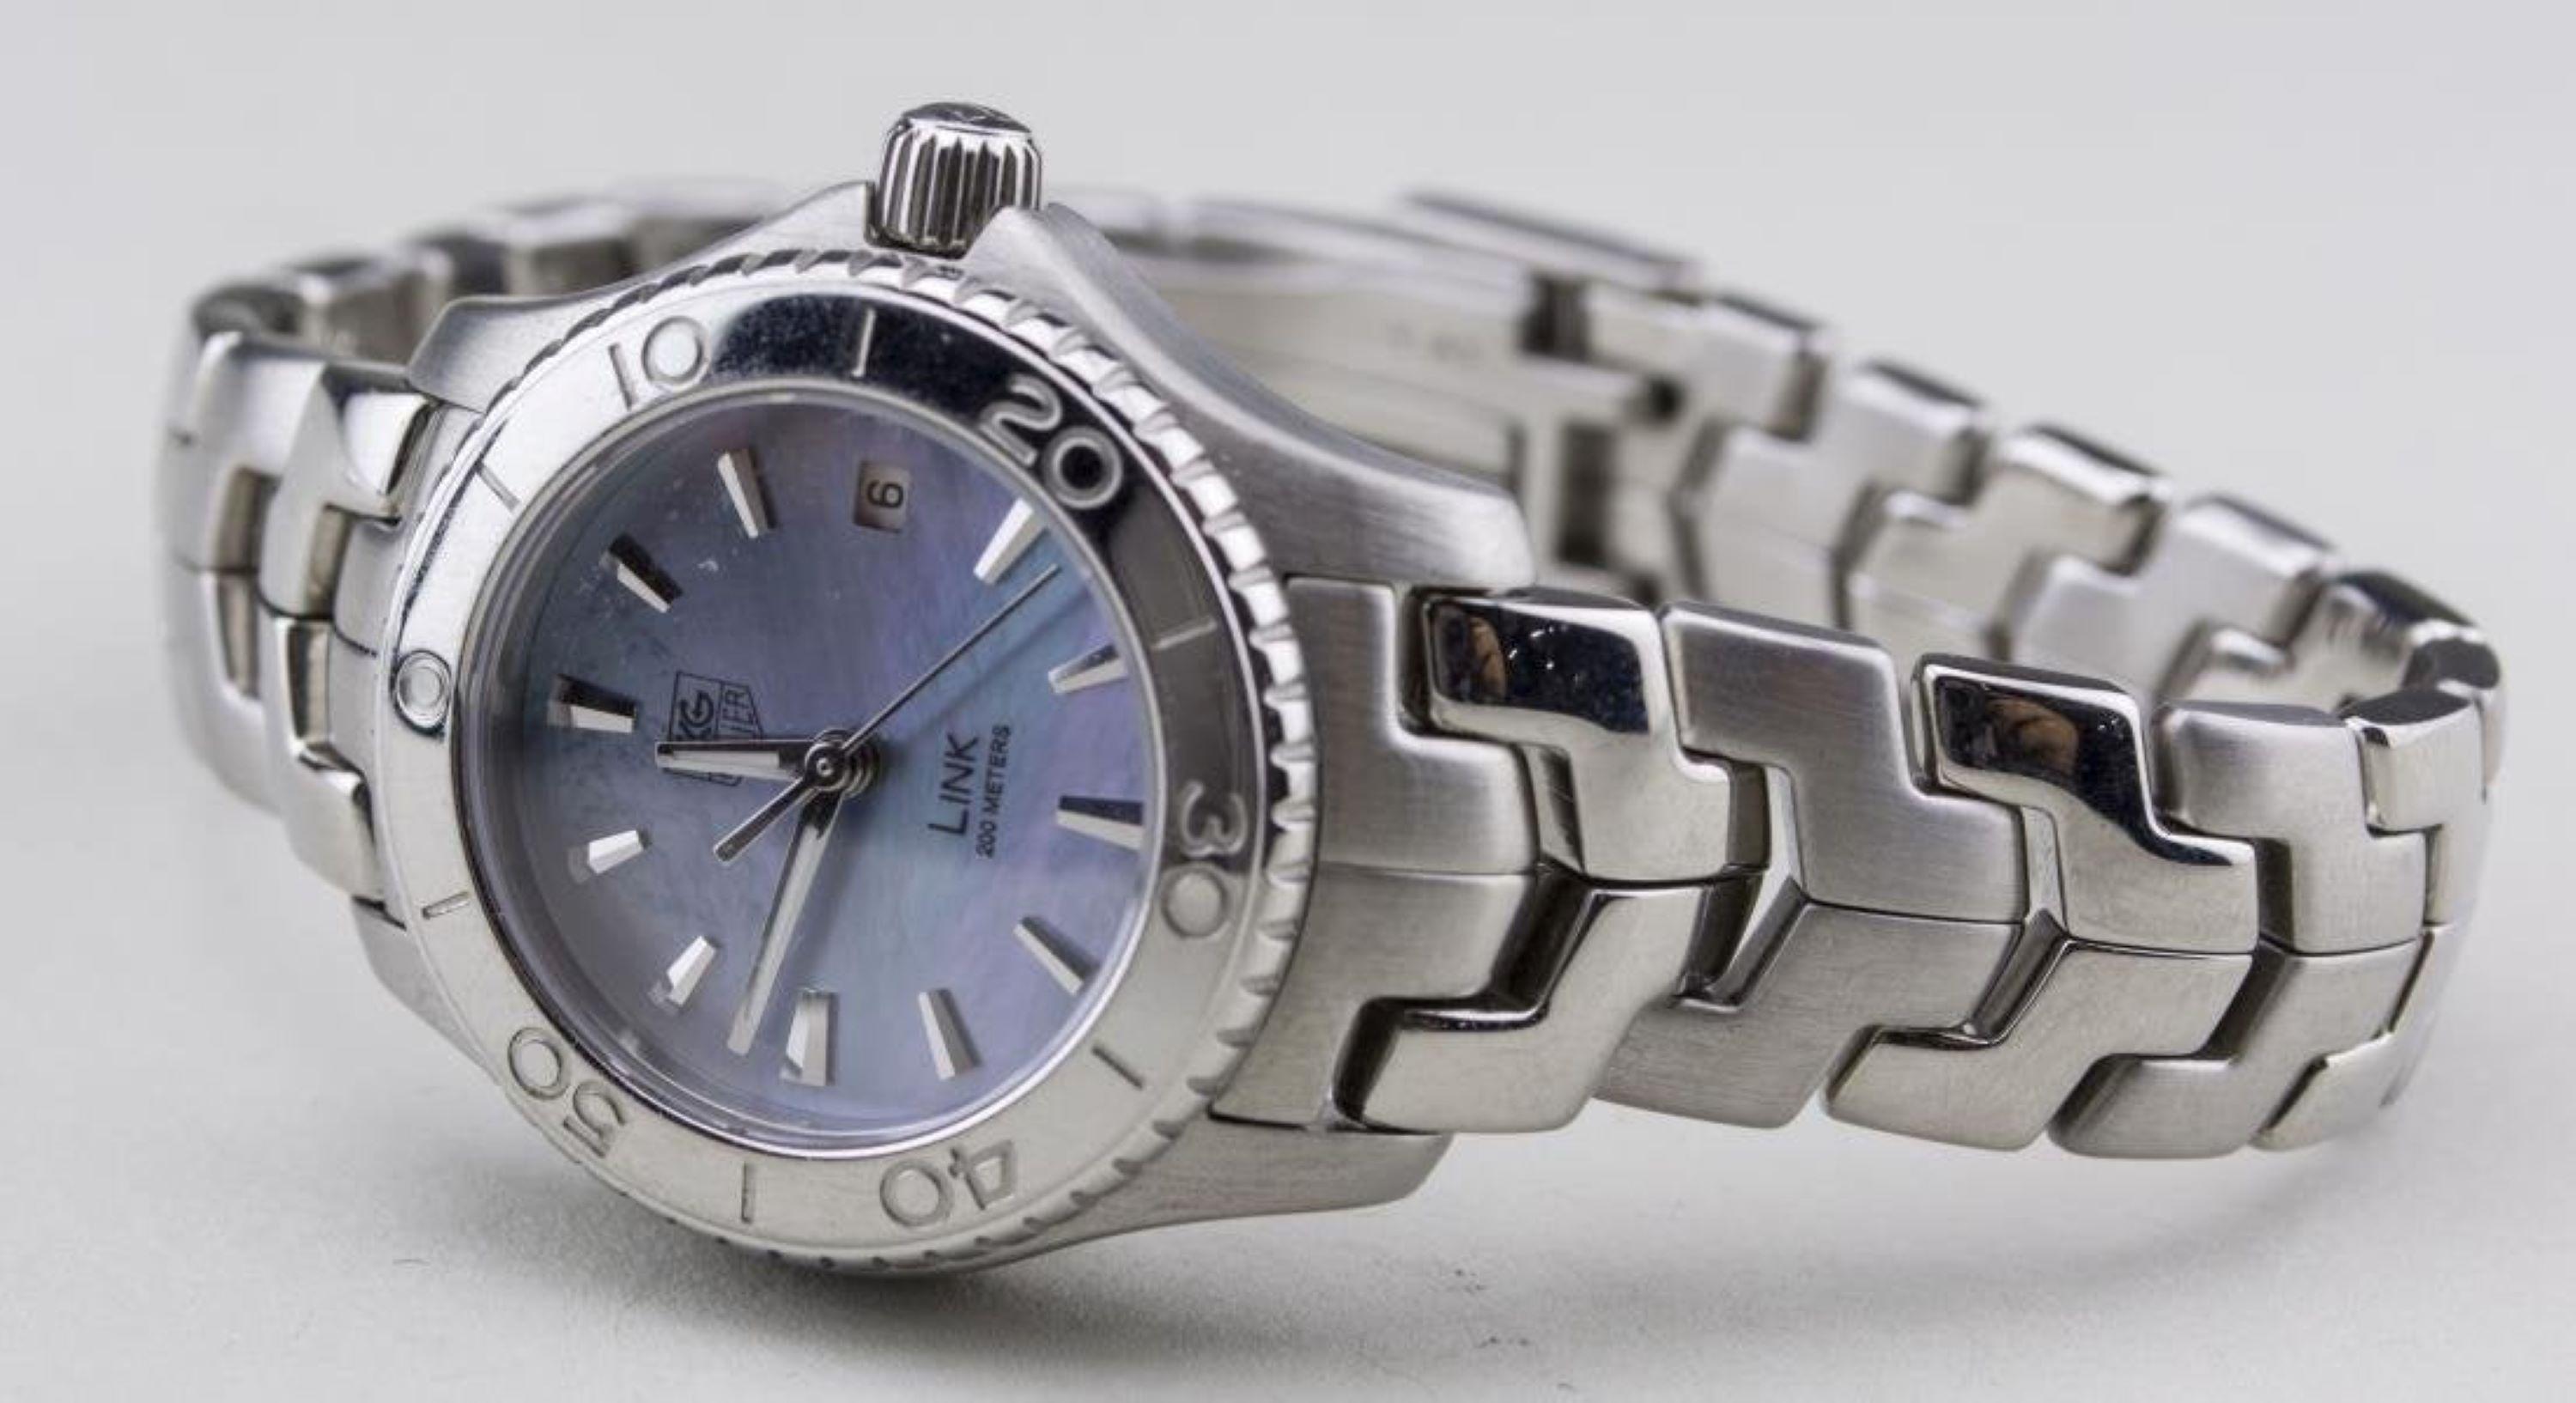 Blue mother of pearl dial with baton hours, date aperture, stainless steel band.